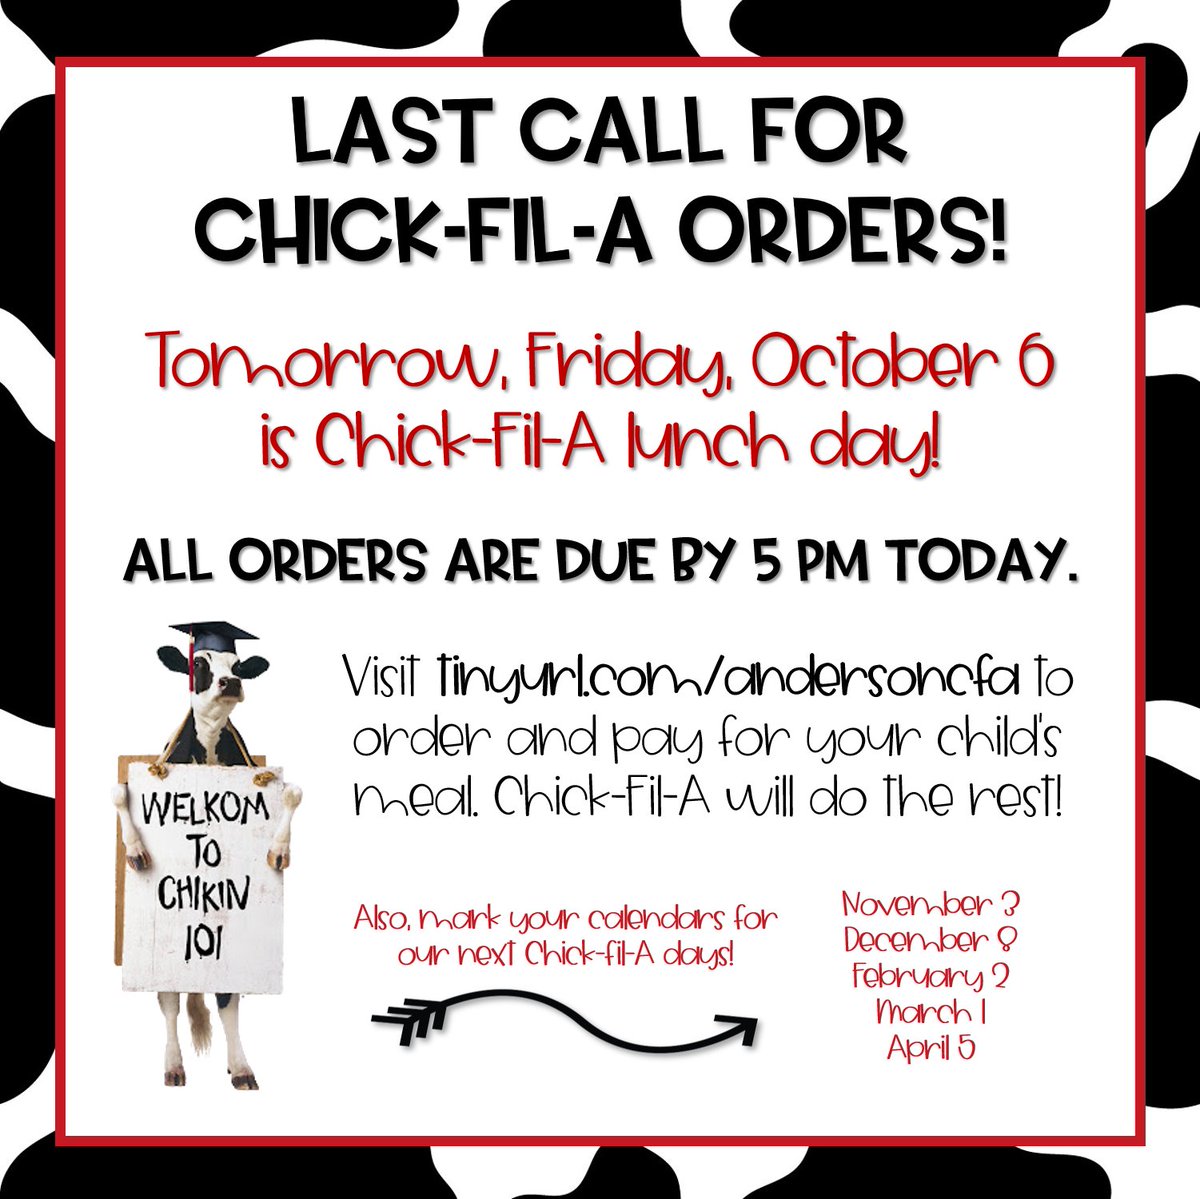 Last call for Chick-Fil-A lunch orders! All student and staff orders are due by 5 pm today for delivery tomorrow. If you haven't placed your order yet, please do so ASAP! Visit tinyurl.com/andersoncfa to order and pay for your child's meal. Chick-fil-A will do the rest!